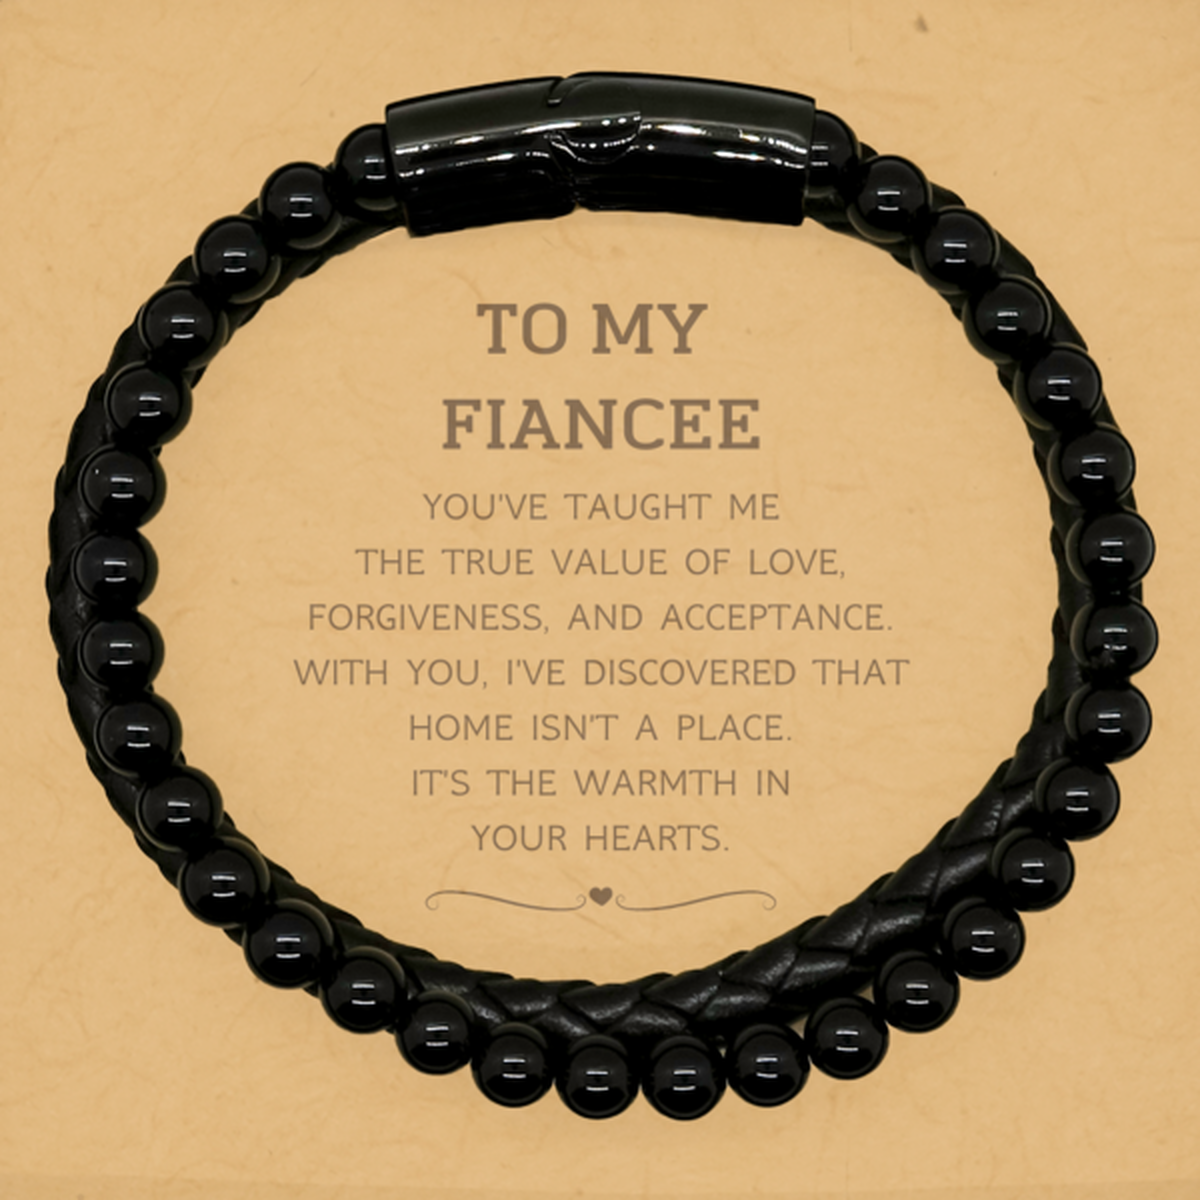 To My Fiancee Gifts, You've taught me the true value of love, Thank You Gifts For Fiancee, Birthday Stone Leather Bracelets For Fiancee